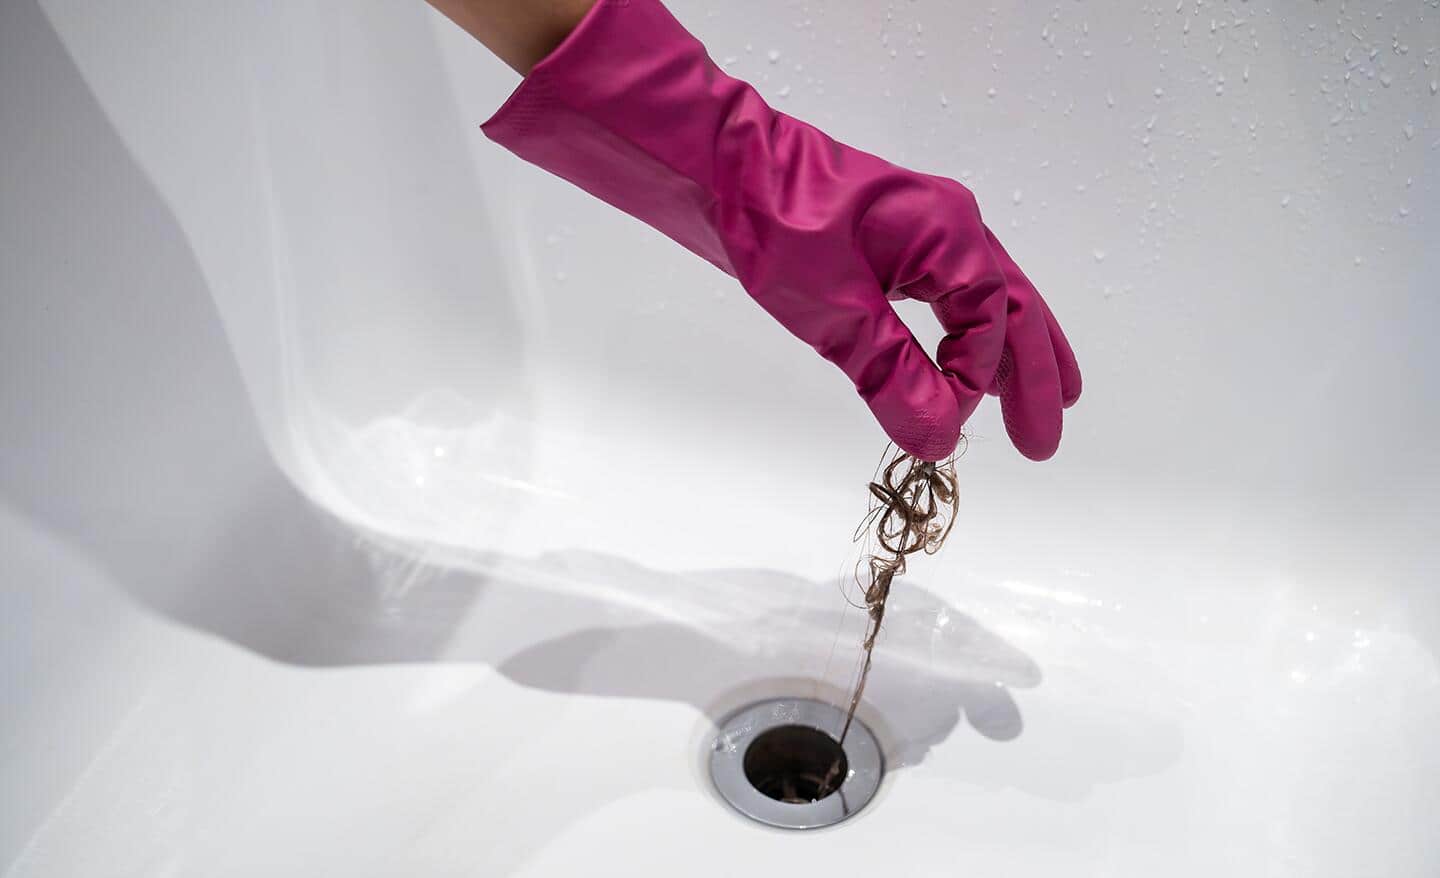 A gloved hand pulls hair from a drain.